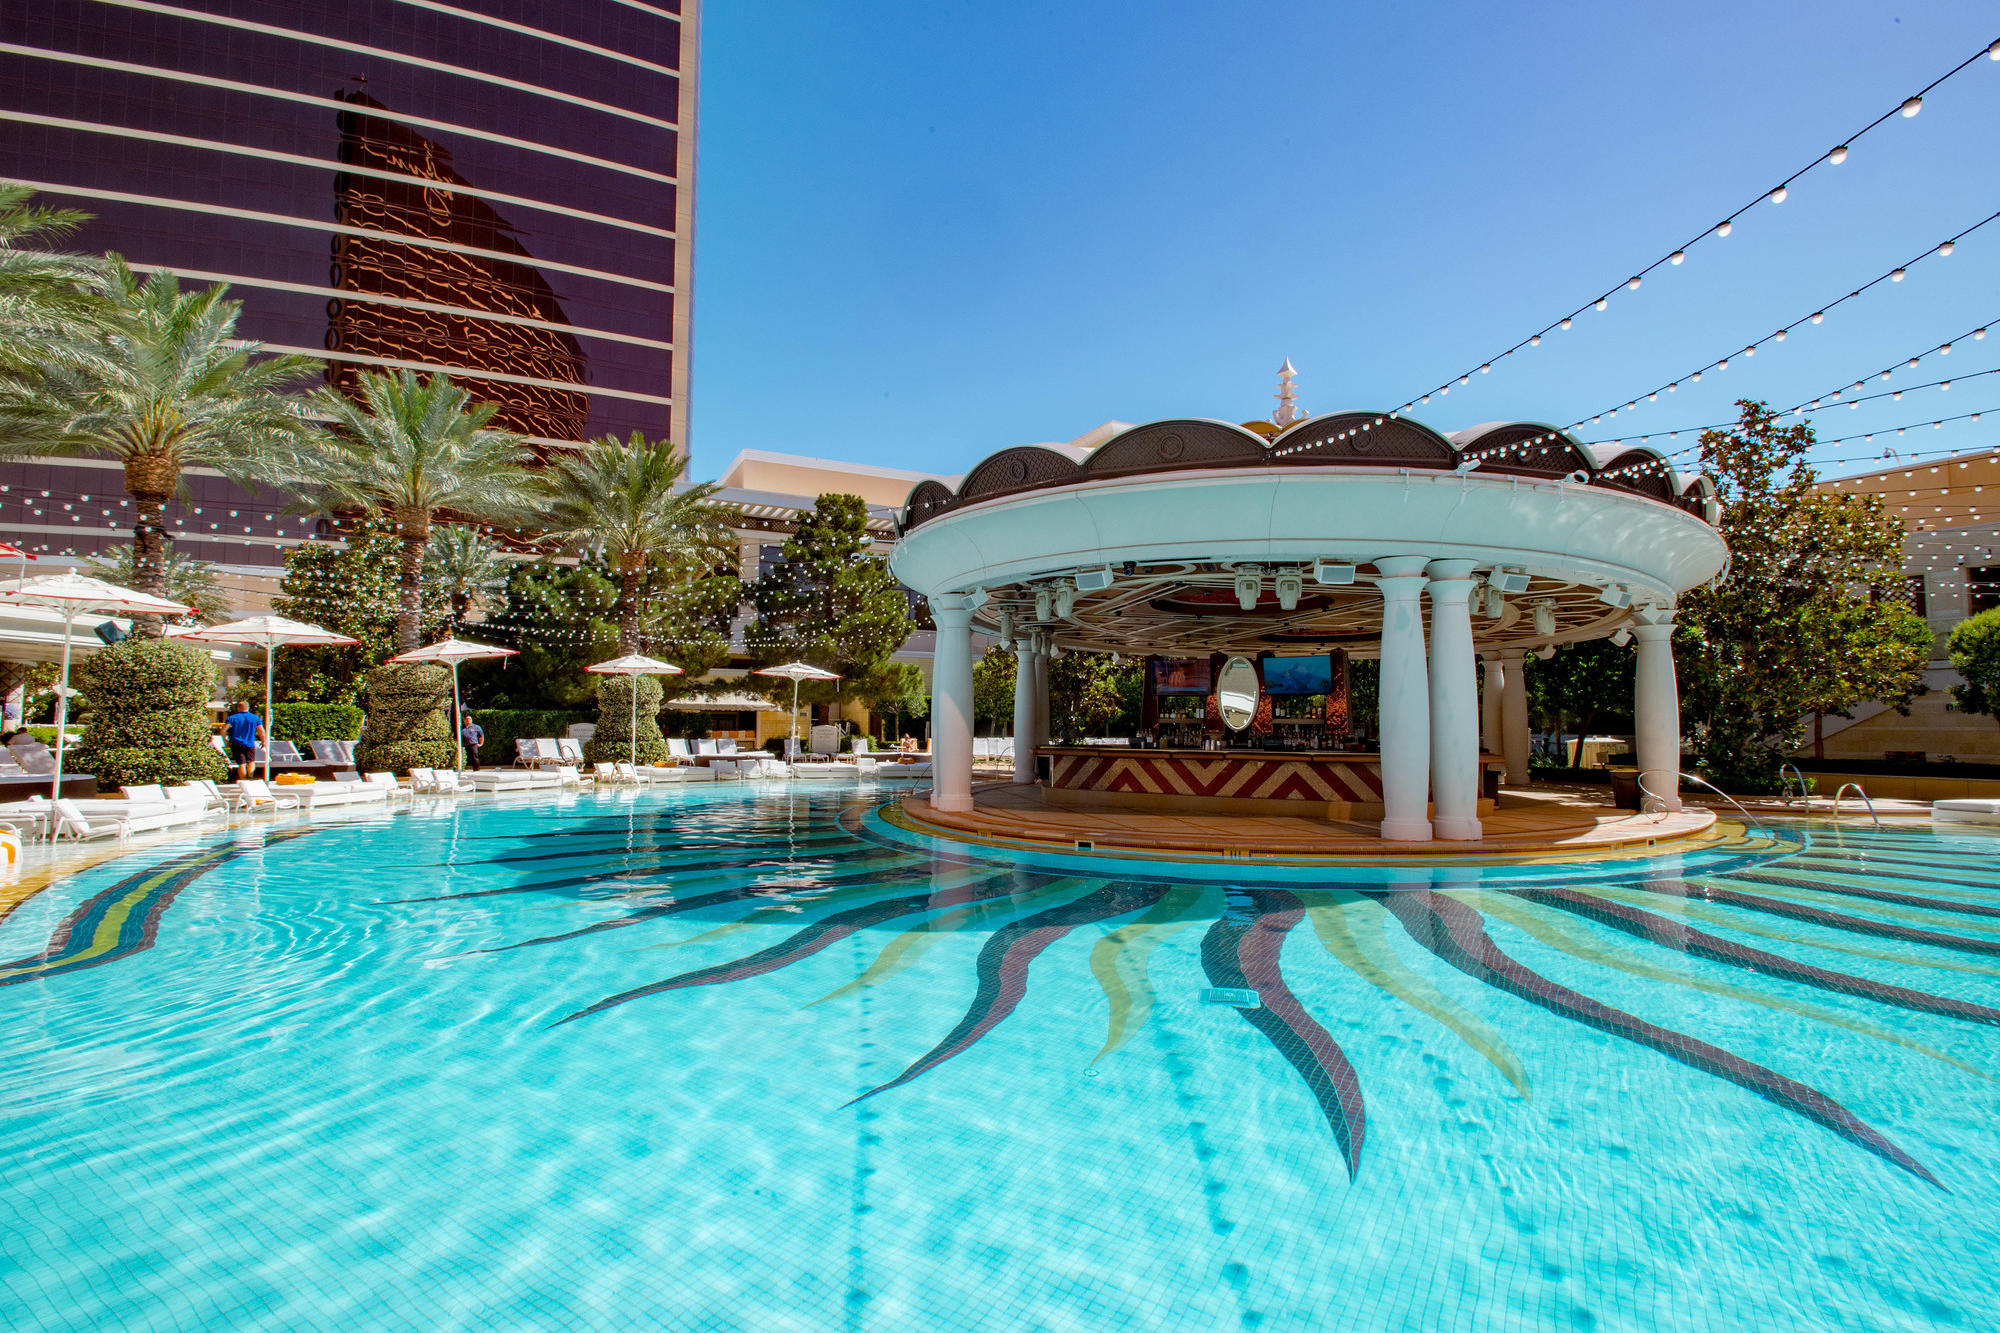 Topless Pool Las Vegas - A Complete Guide (PHOTOS)